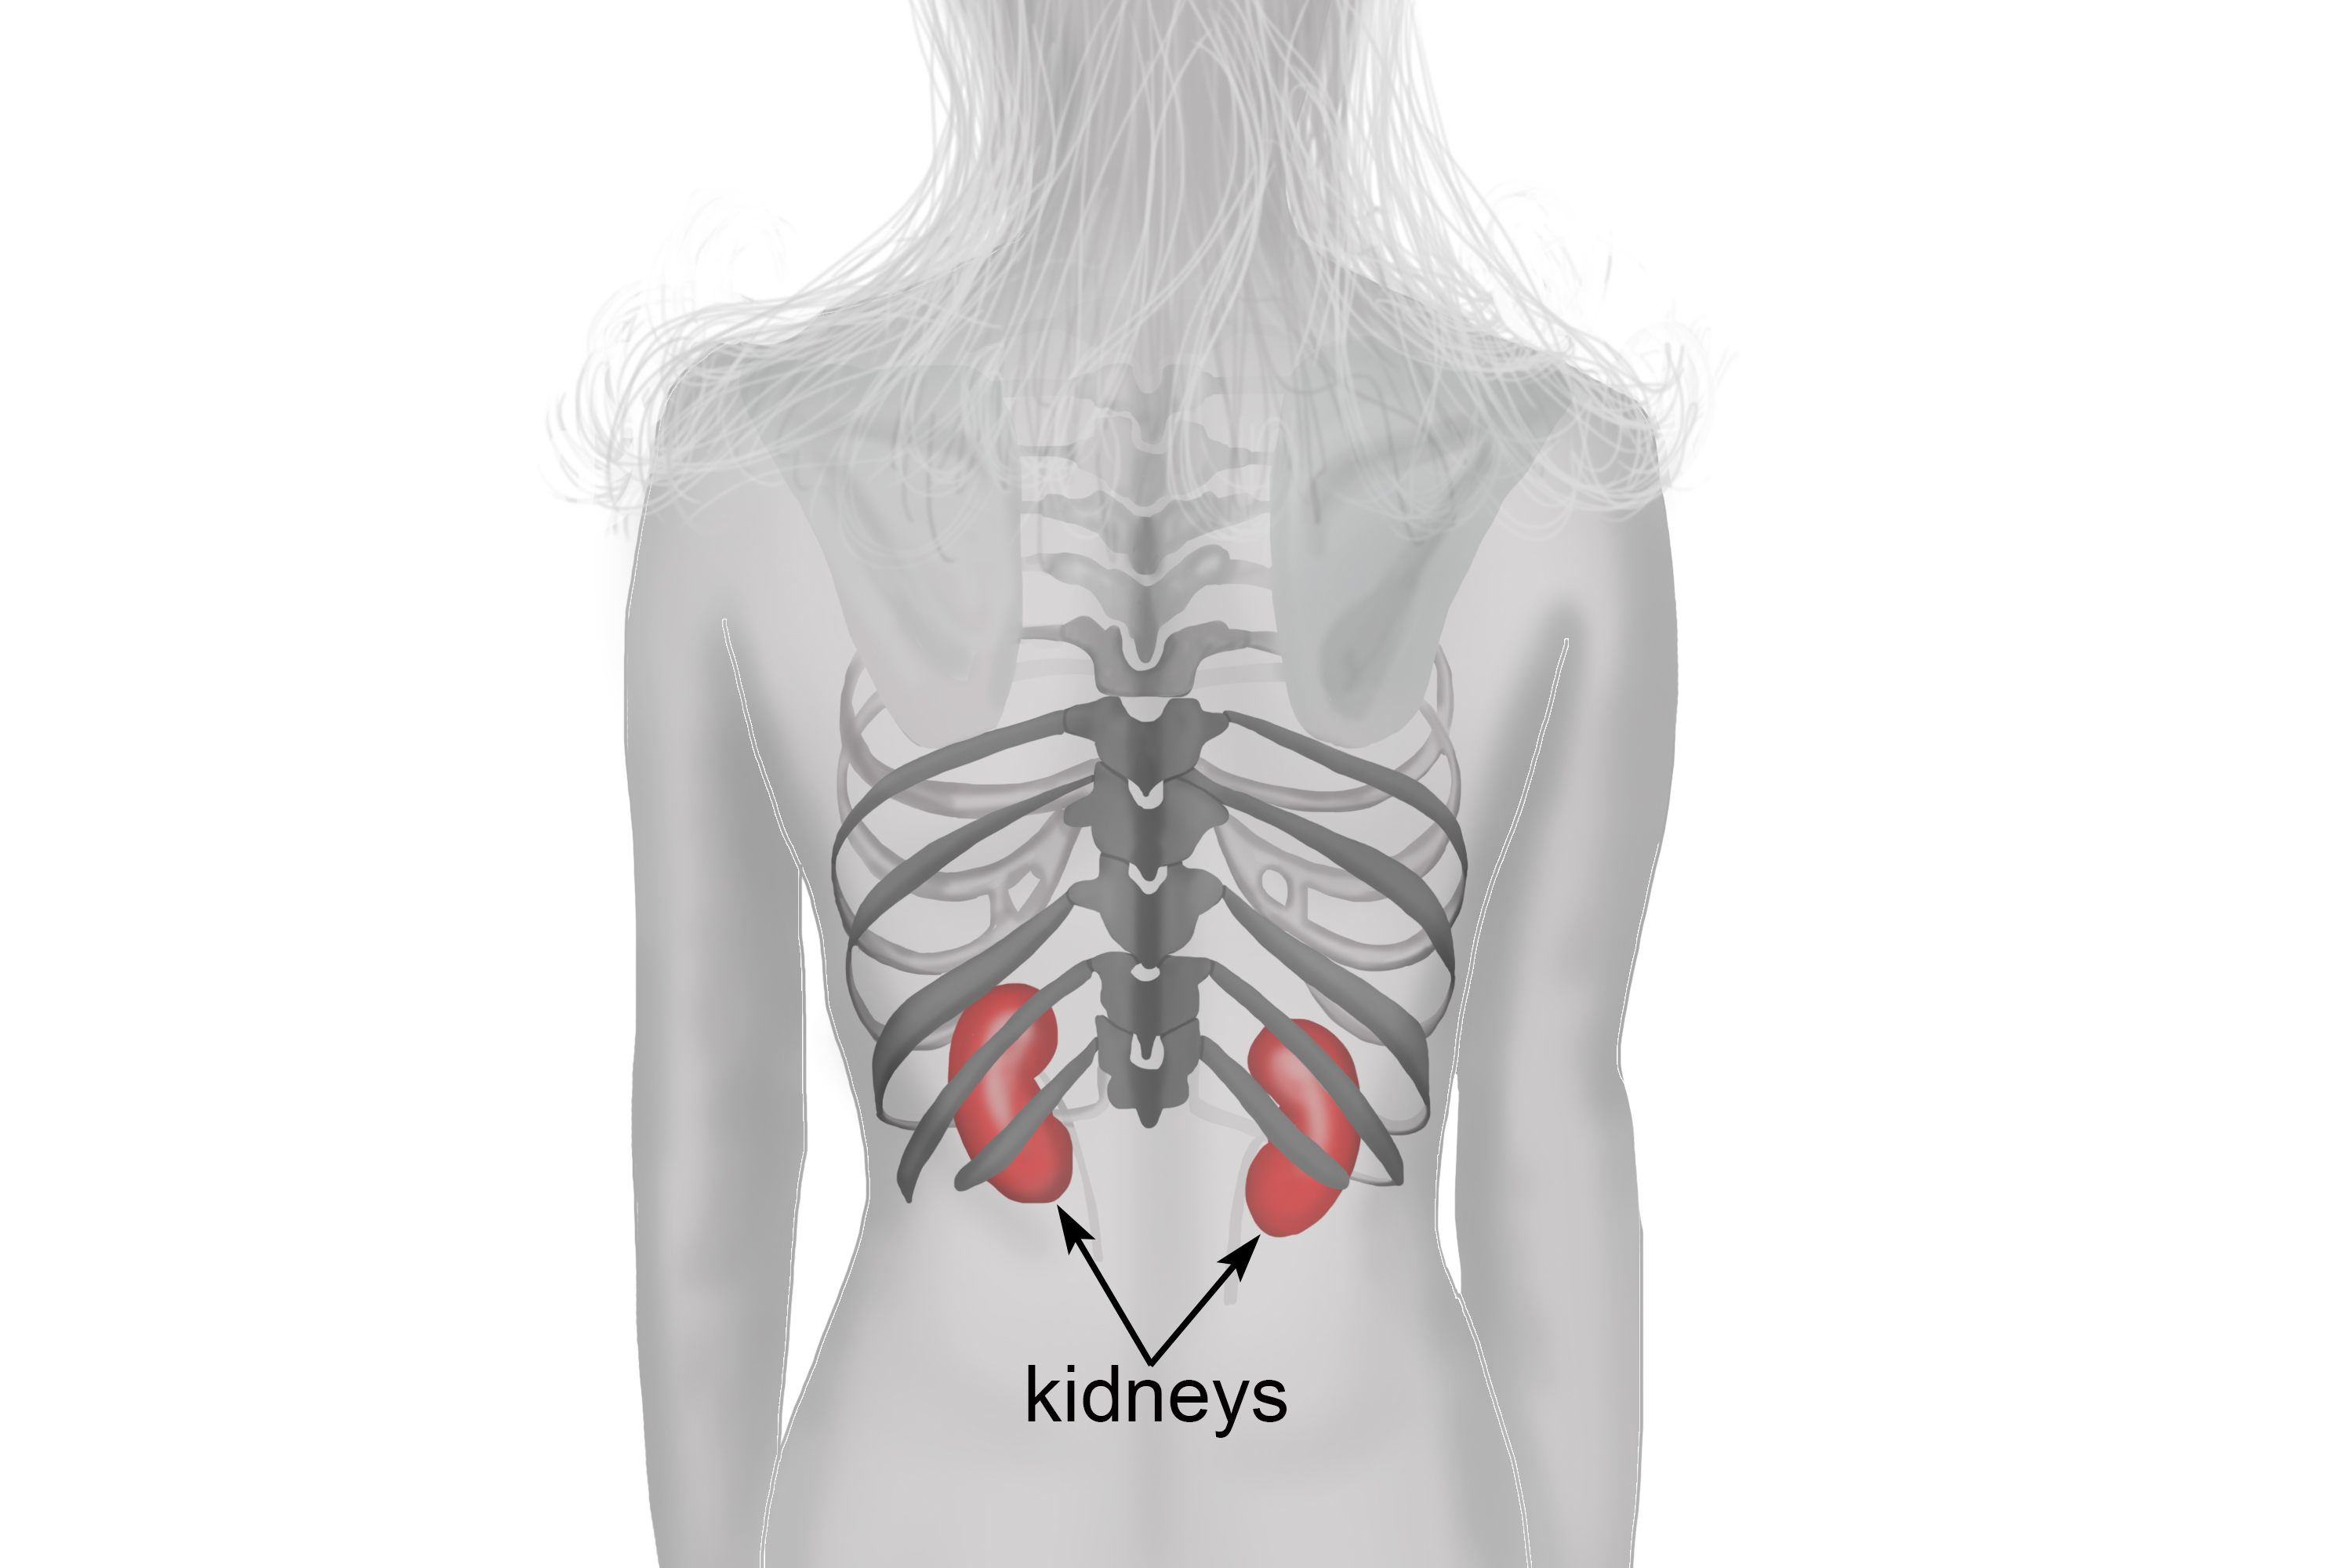 Size and position of the kidneys in the body